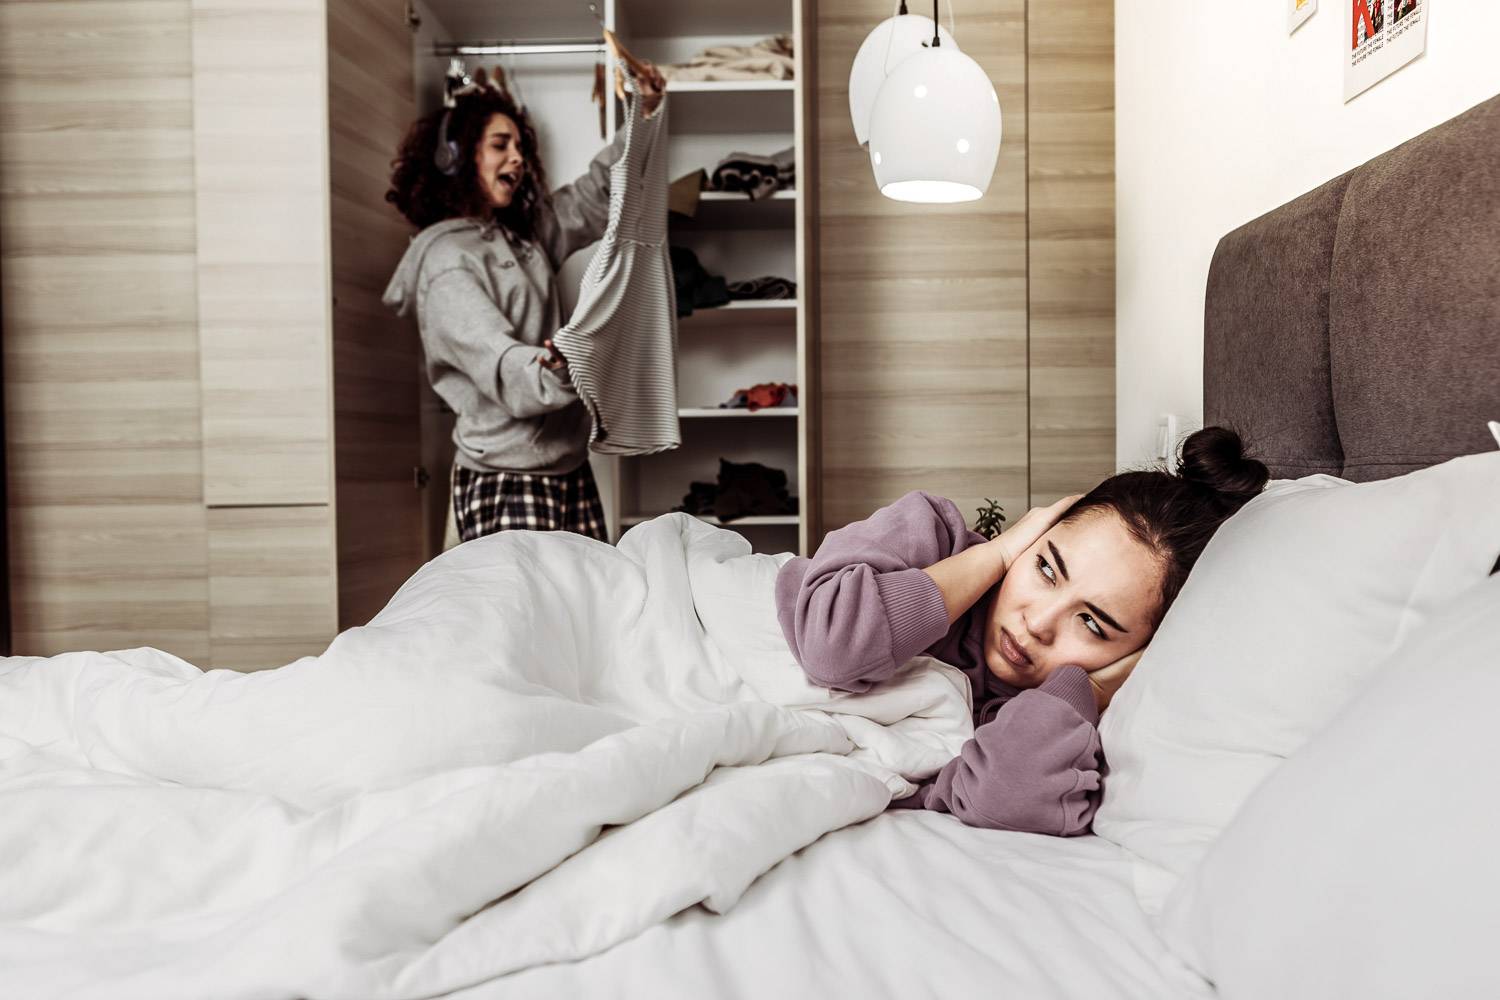 Image of a girl in bed with her hands over her ears while another girl sings with headphones on in the background while looking at clothes in the closet